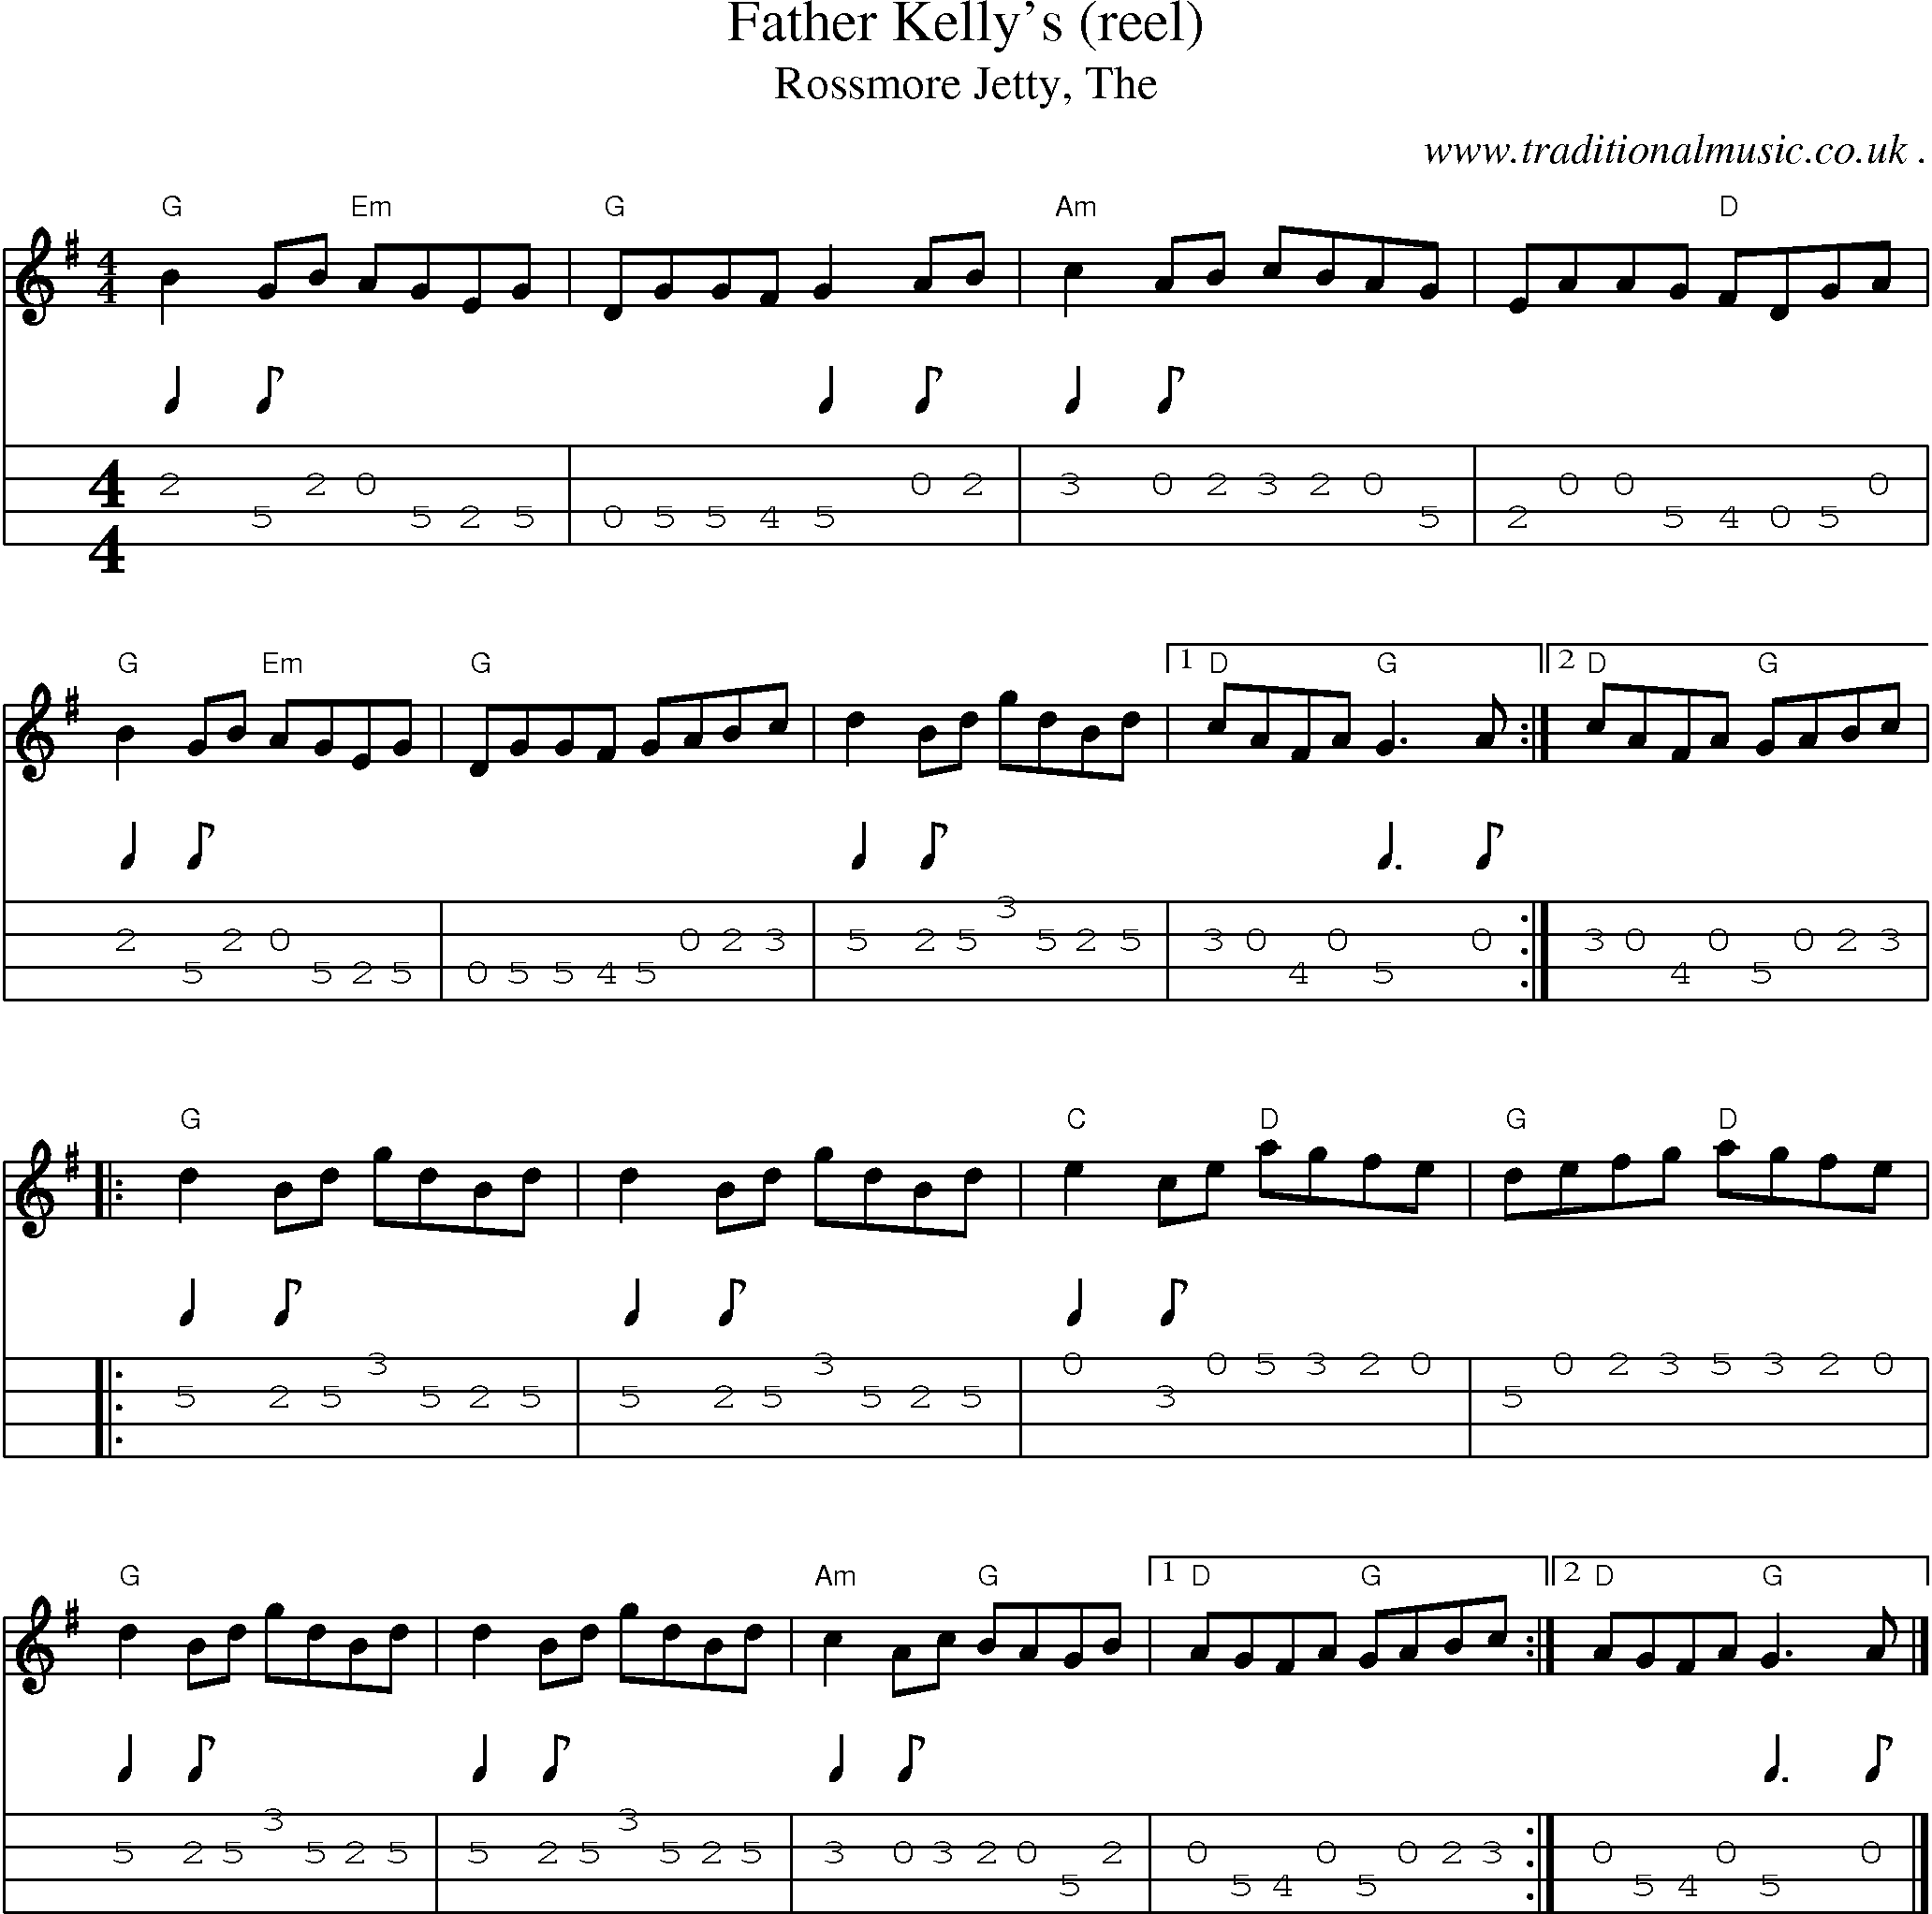 Music Score and Guitar Tabs for Father Kellys (reel)